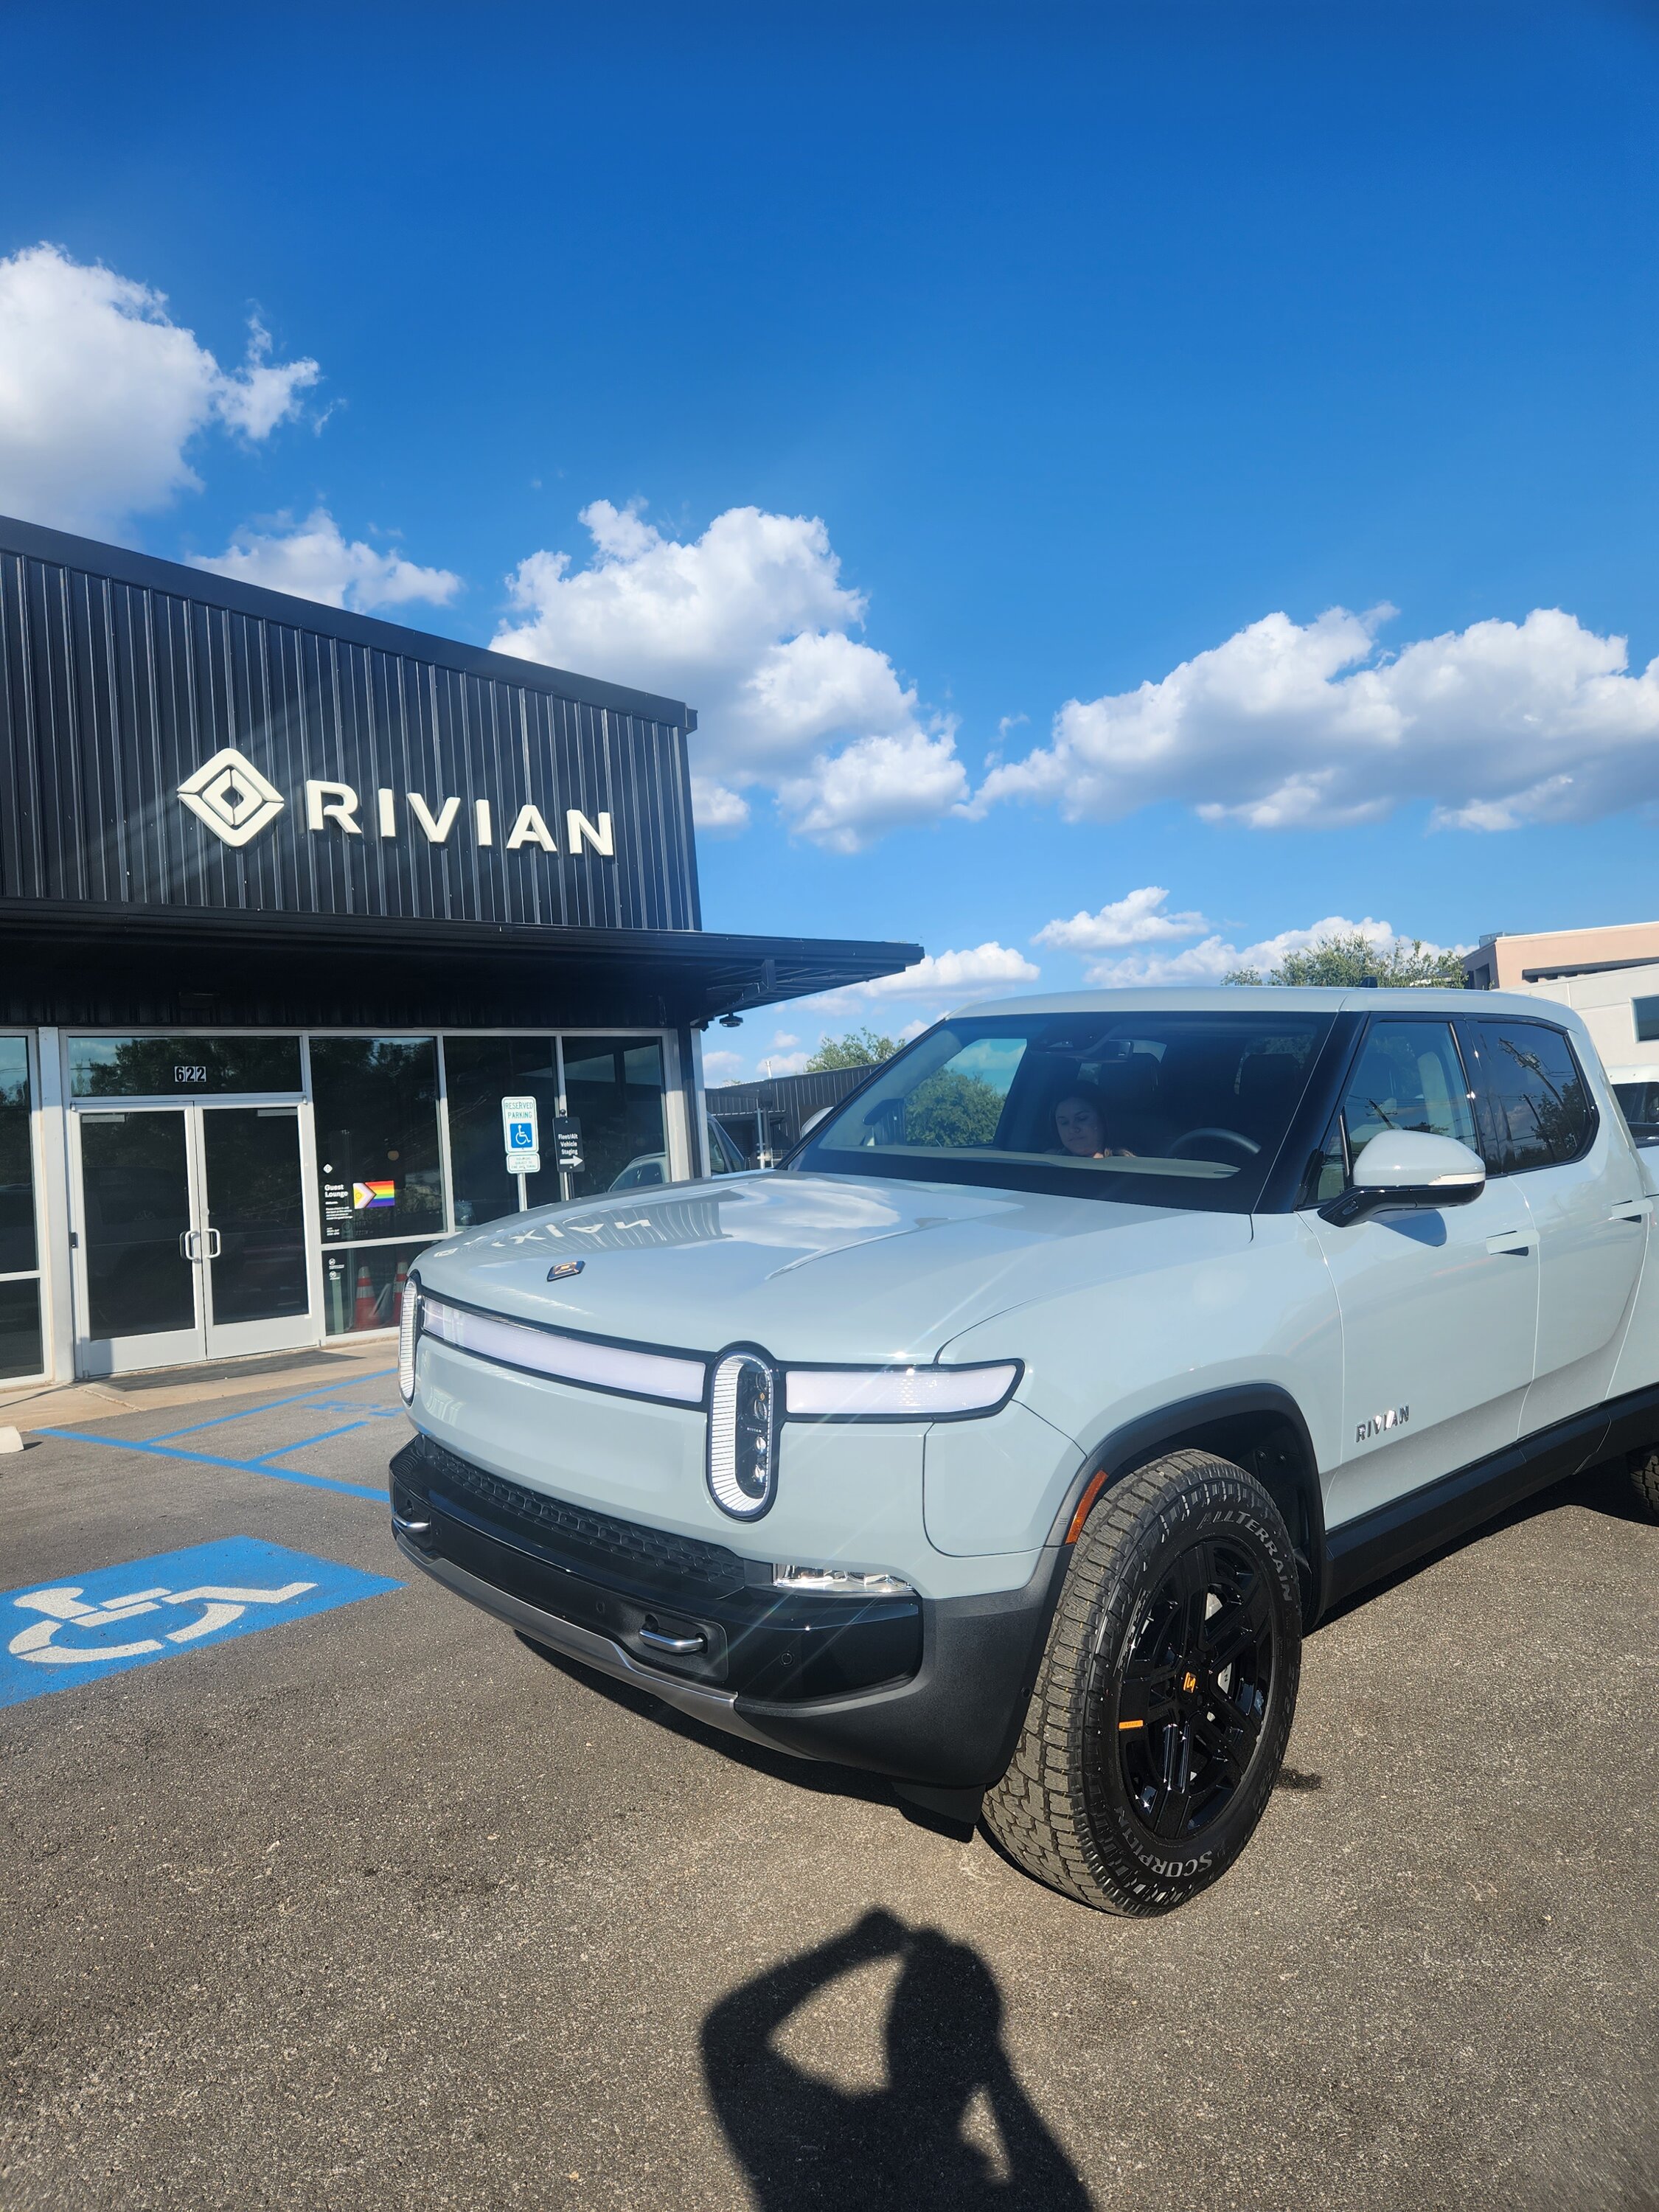 Rivian R1T R1S First Pic of Your Rivian 20230929_170759